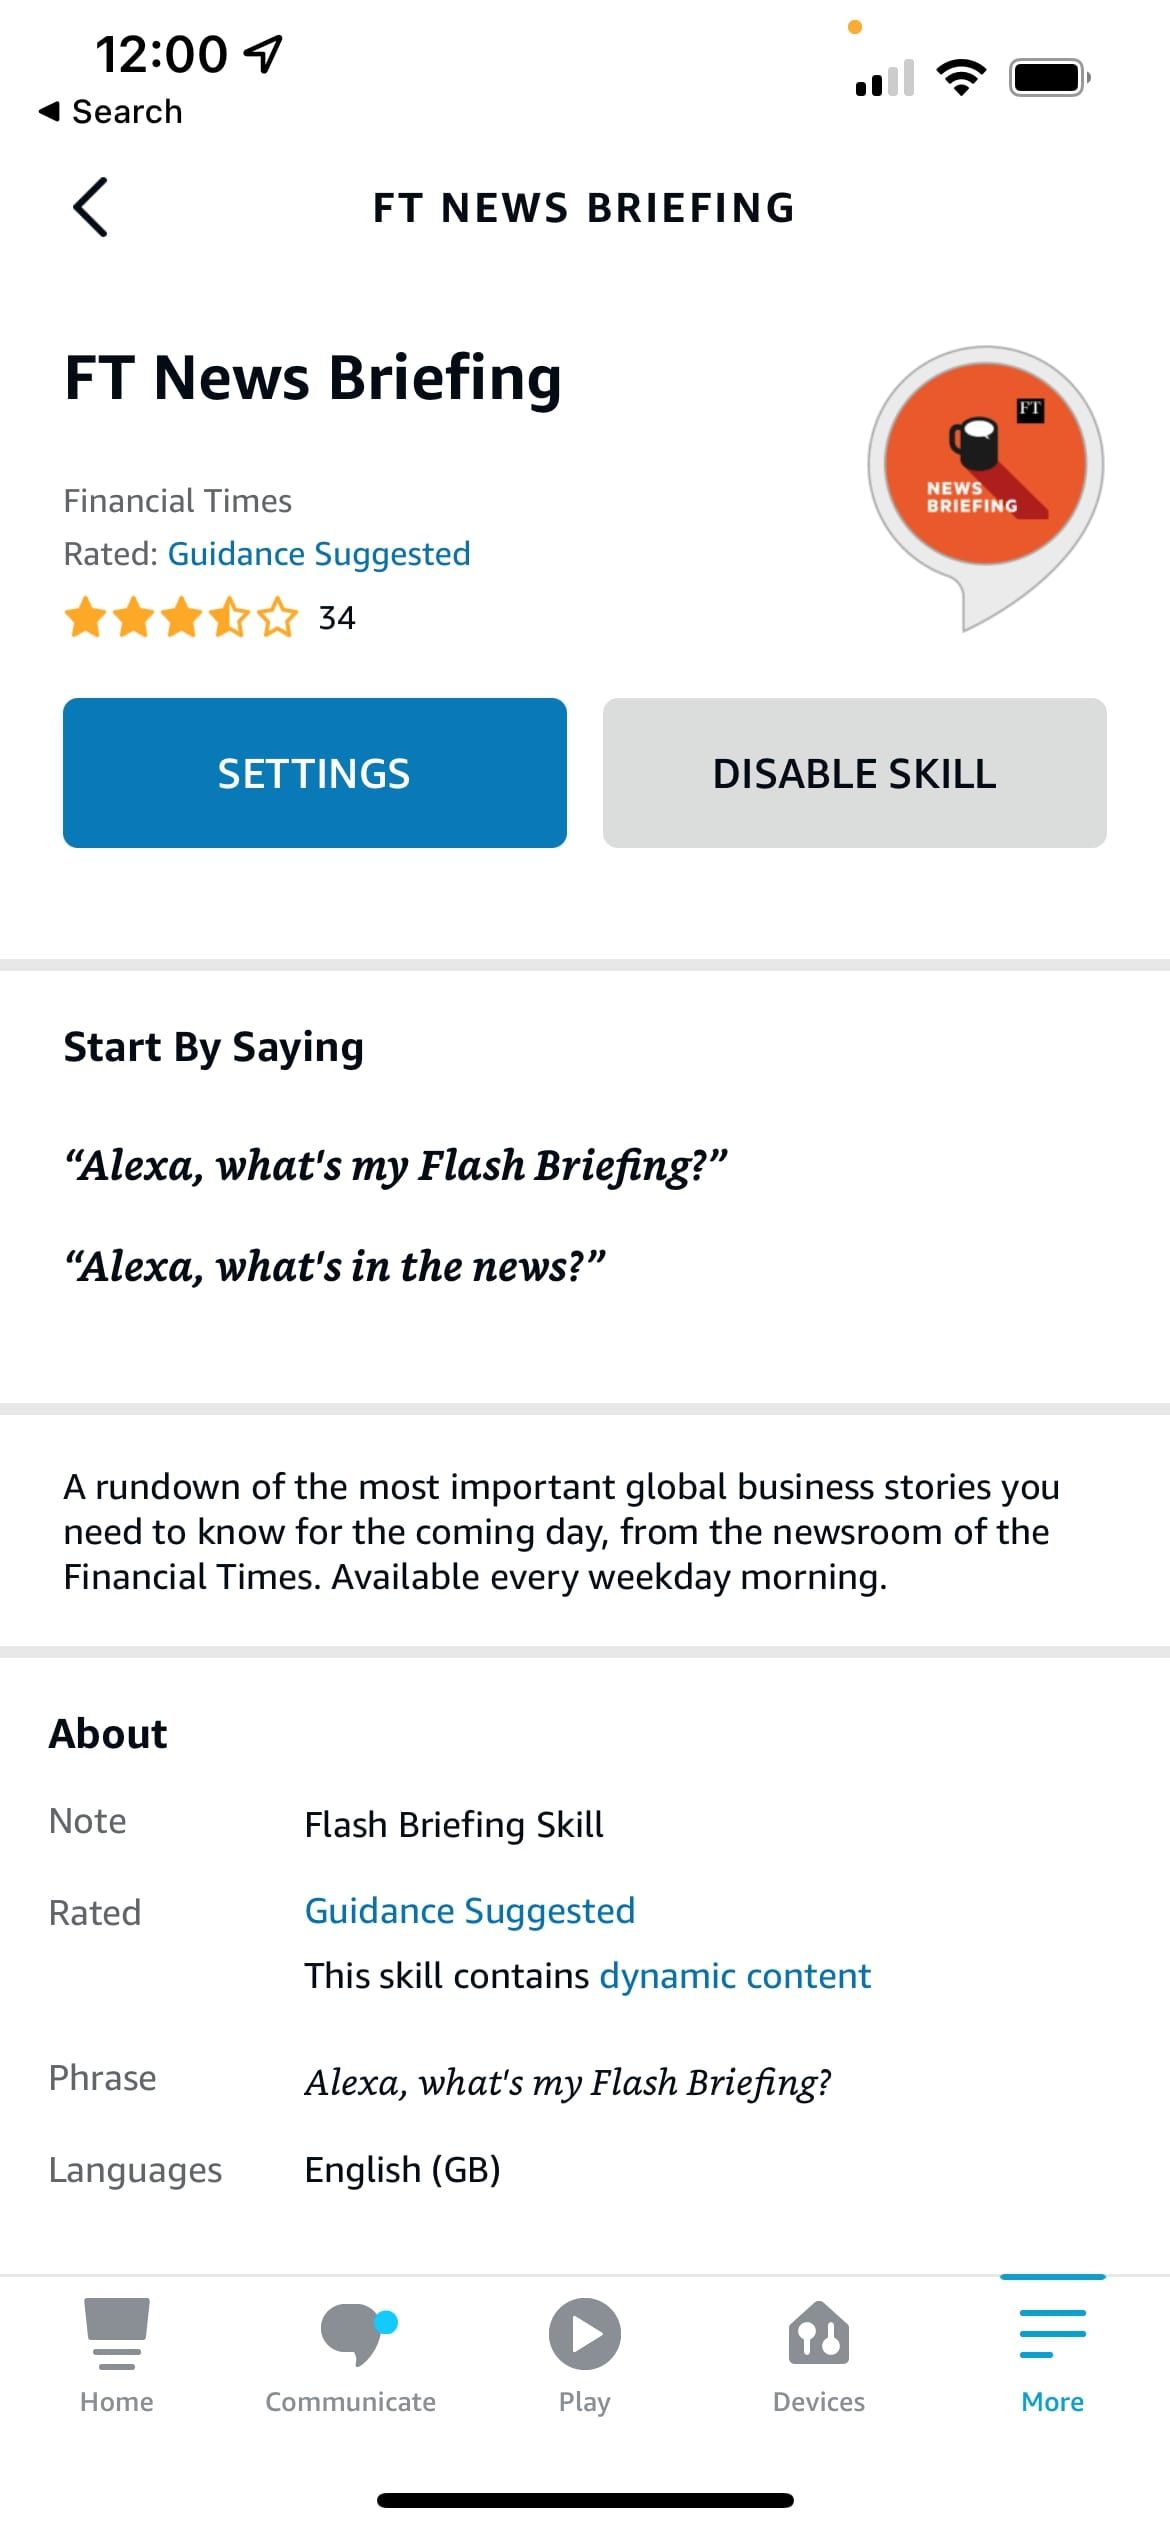 The FT News Briefing Flash Briefing skill